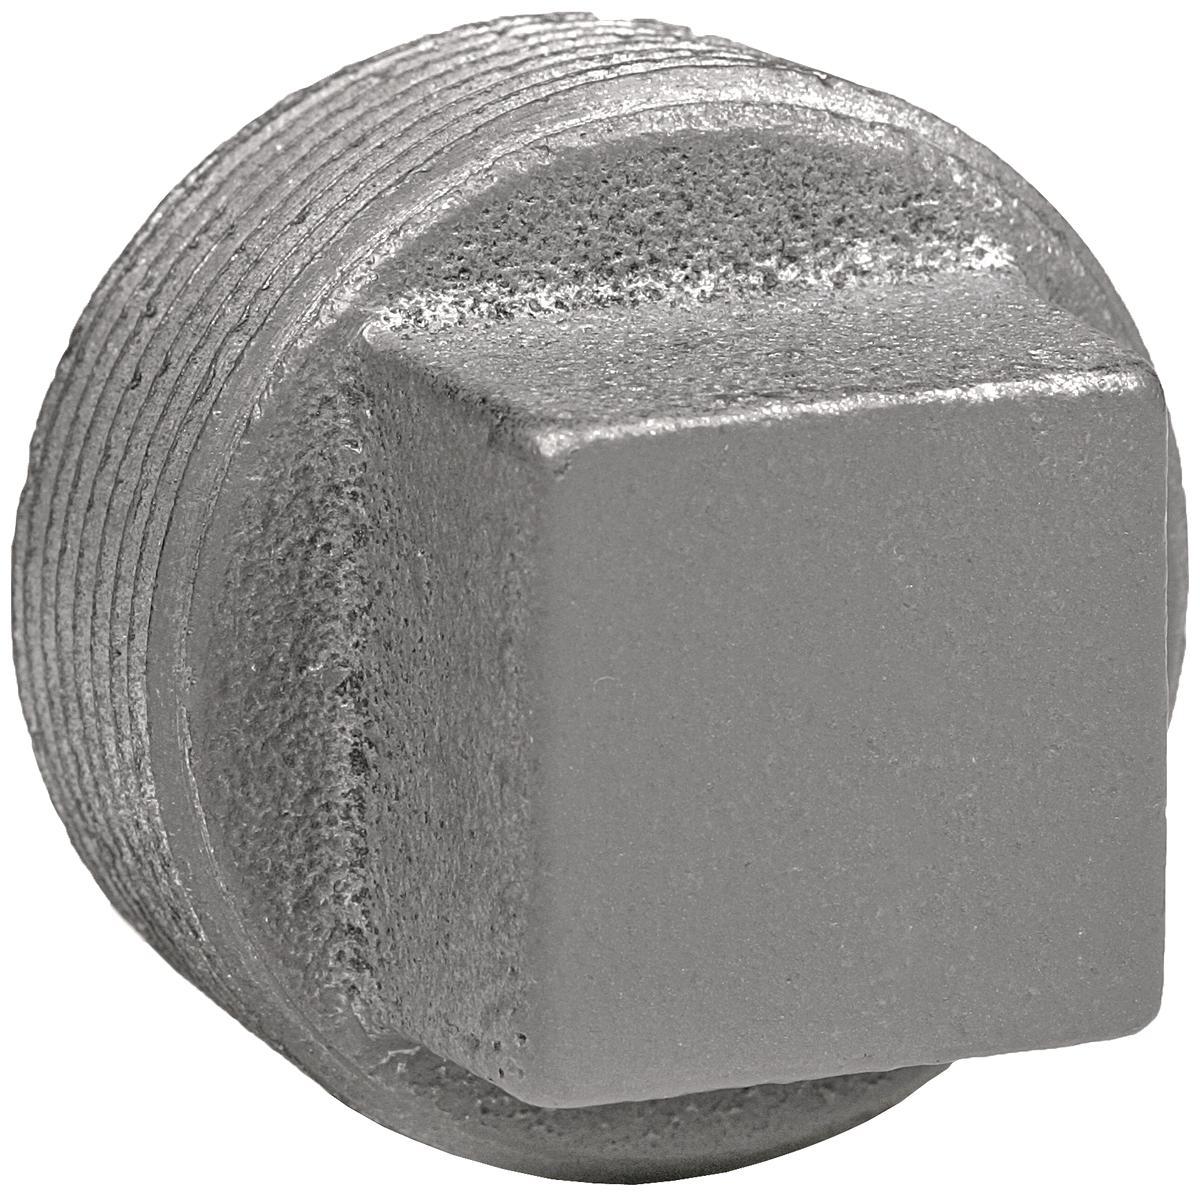 Hubbell PLUG4-SQ 1-1/4" Iron, (Zinc Plated) Threaded Insert Plug, Square Head  ; Threaded hubs (NPT) ; To close up a tapped hole or hub ; Threaded hubs (NPT).